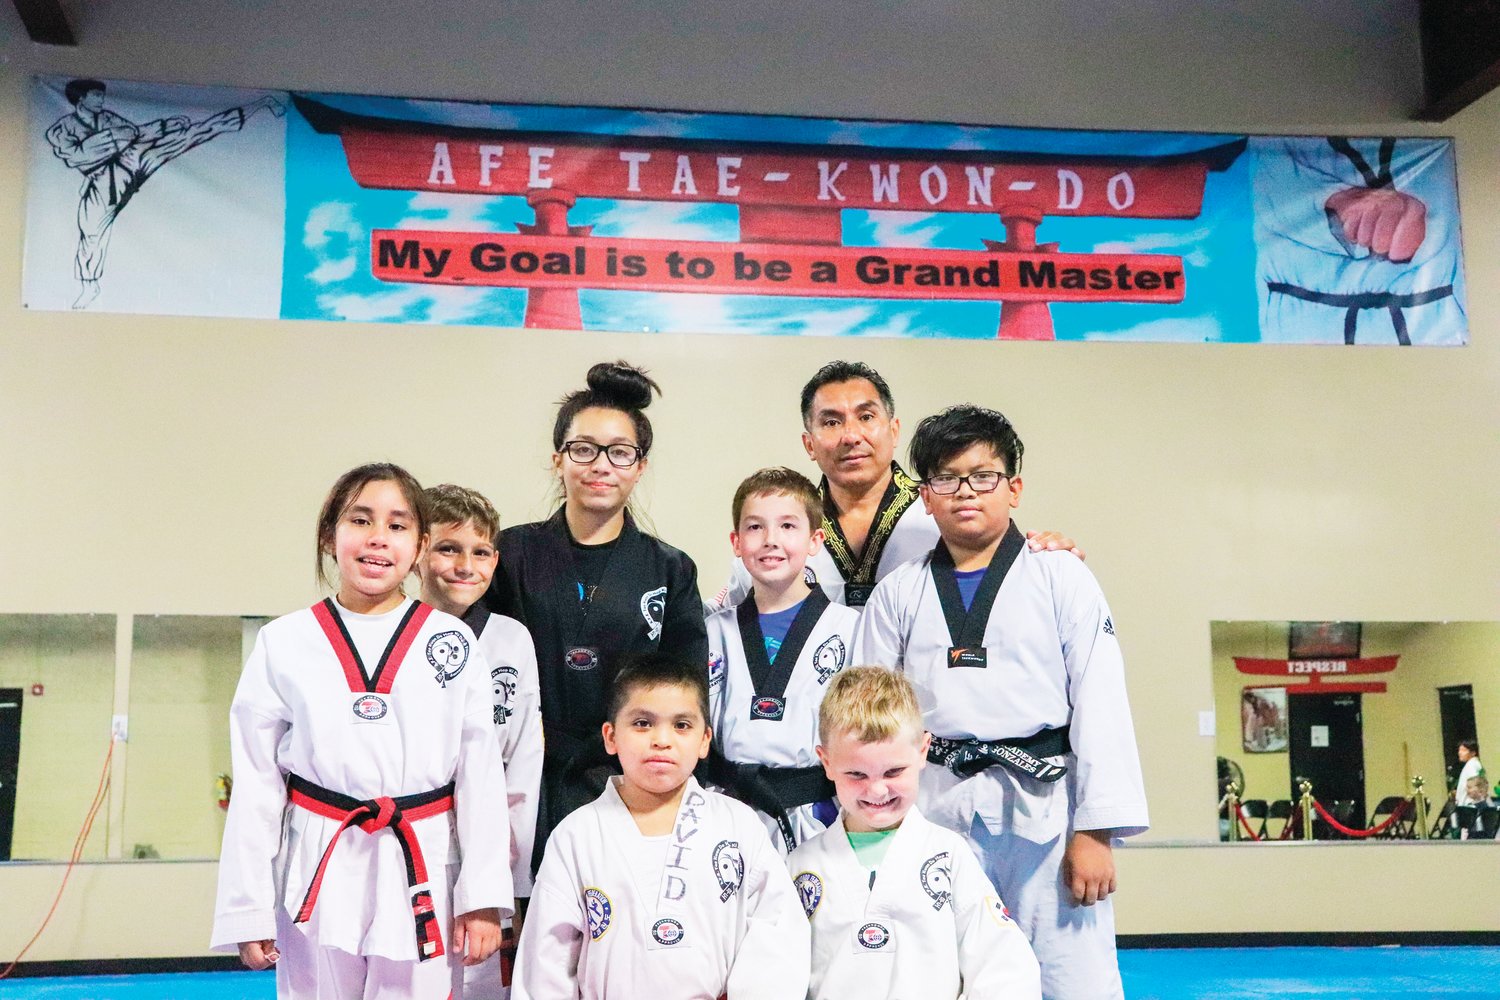 The advanced class at A.F.E. Taekwondo Fitness Academy (top row, from left to right: Eli Ara (black), Antonio Ara; middle row, from left to right: Vennus Paz, Zach Riggsbee, Fischer Pike, David Jiminez; bottom row, from left to right: Yoxander de la Cruz, Canne Applewhite) poses for a group shot following their class on Monday.